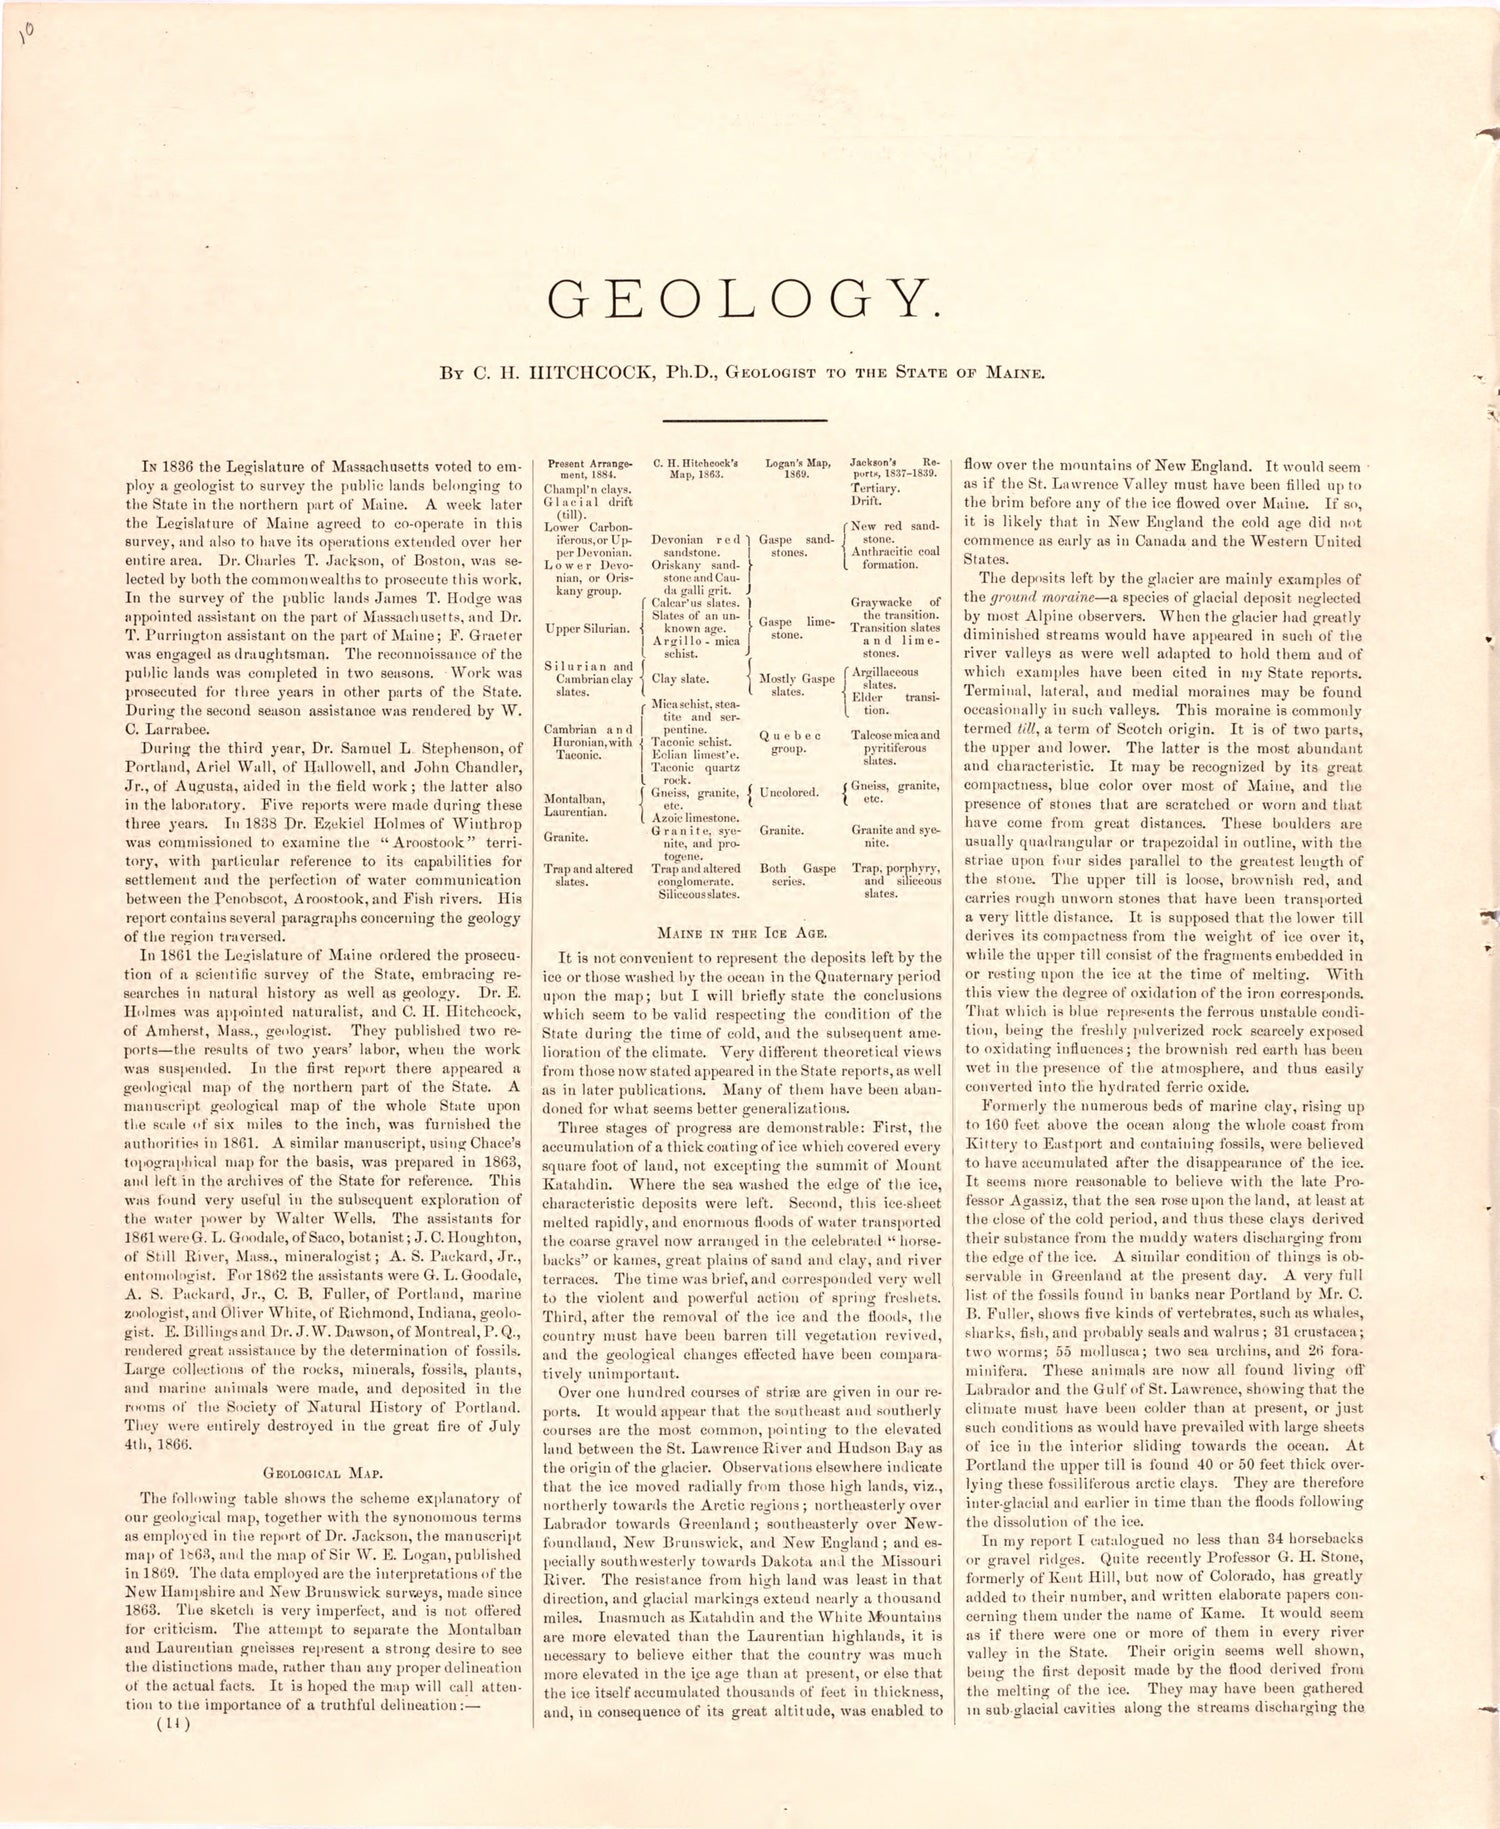 This hand drawn illustration (map) of Geologycontinued from Colby&